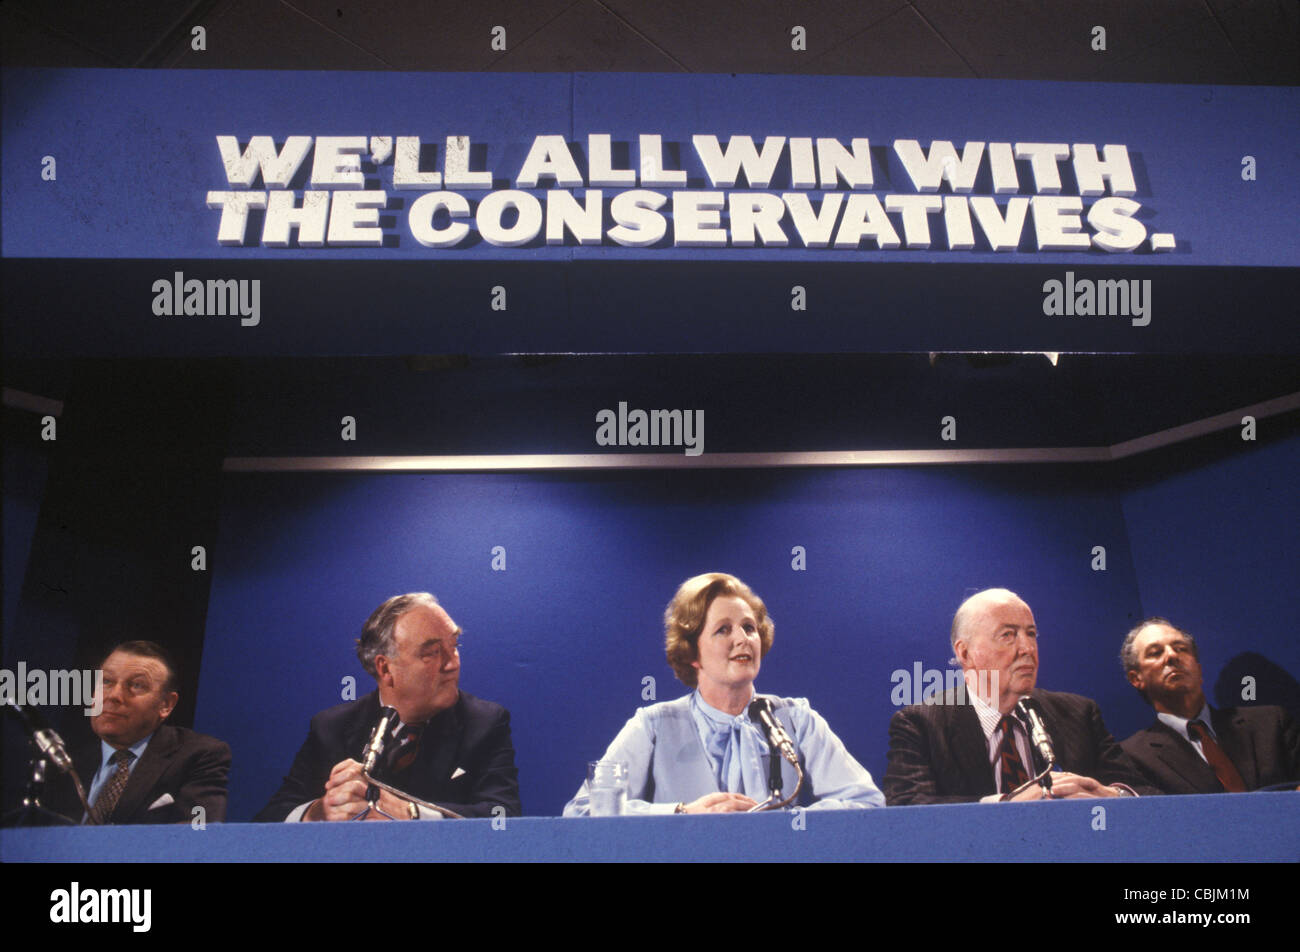 Margaret Thatcher 1979 election press conference. Conservative Party politicians. Political slogan Well We Will All Win With The Conservatives. (L-R) Francis Pym, William 'Willie' Whitelaw, Mrs Margaret Thatcher  Peter Lord Thorneycroft, Keith Joseph 1970s London England UK.  HOMER SYKES Stock Photo